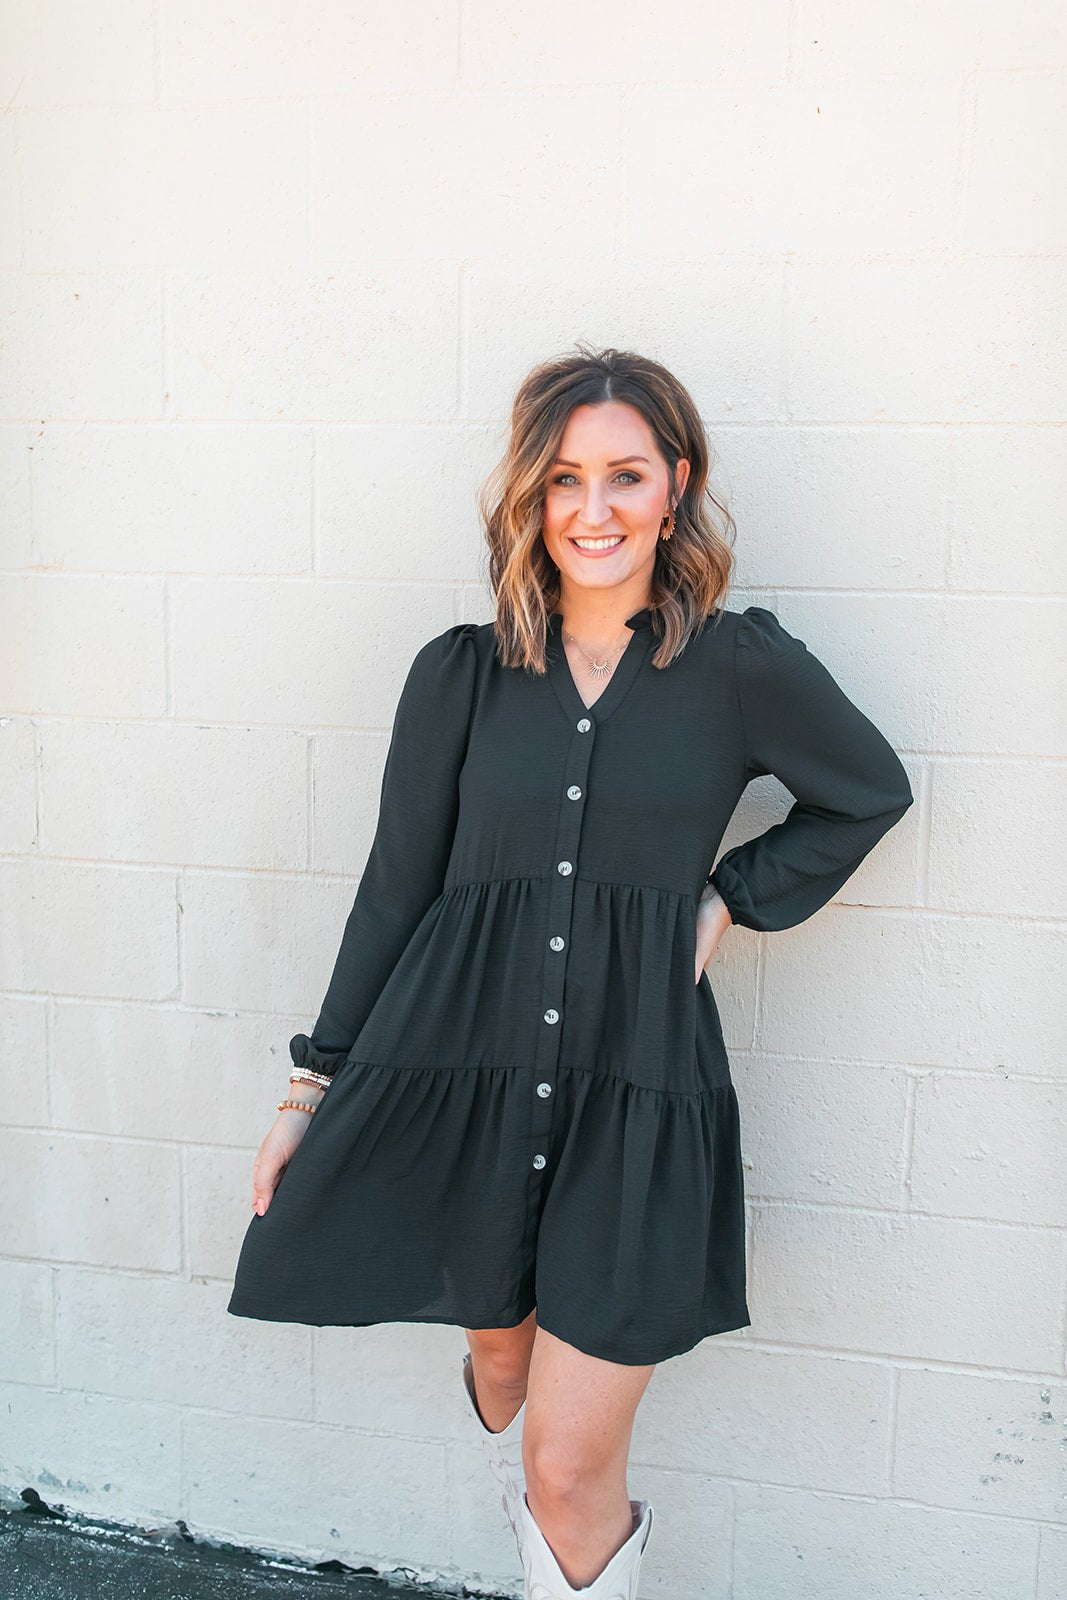 One Eleven Olive Boutique The Riley Button Up Dress (S-2XL) - Black If you are in need of a flattering and easy throw together outfit, look no further than the Riley Button Up Dress! The black color, the tiers, the buttons..the pocke